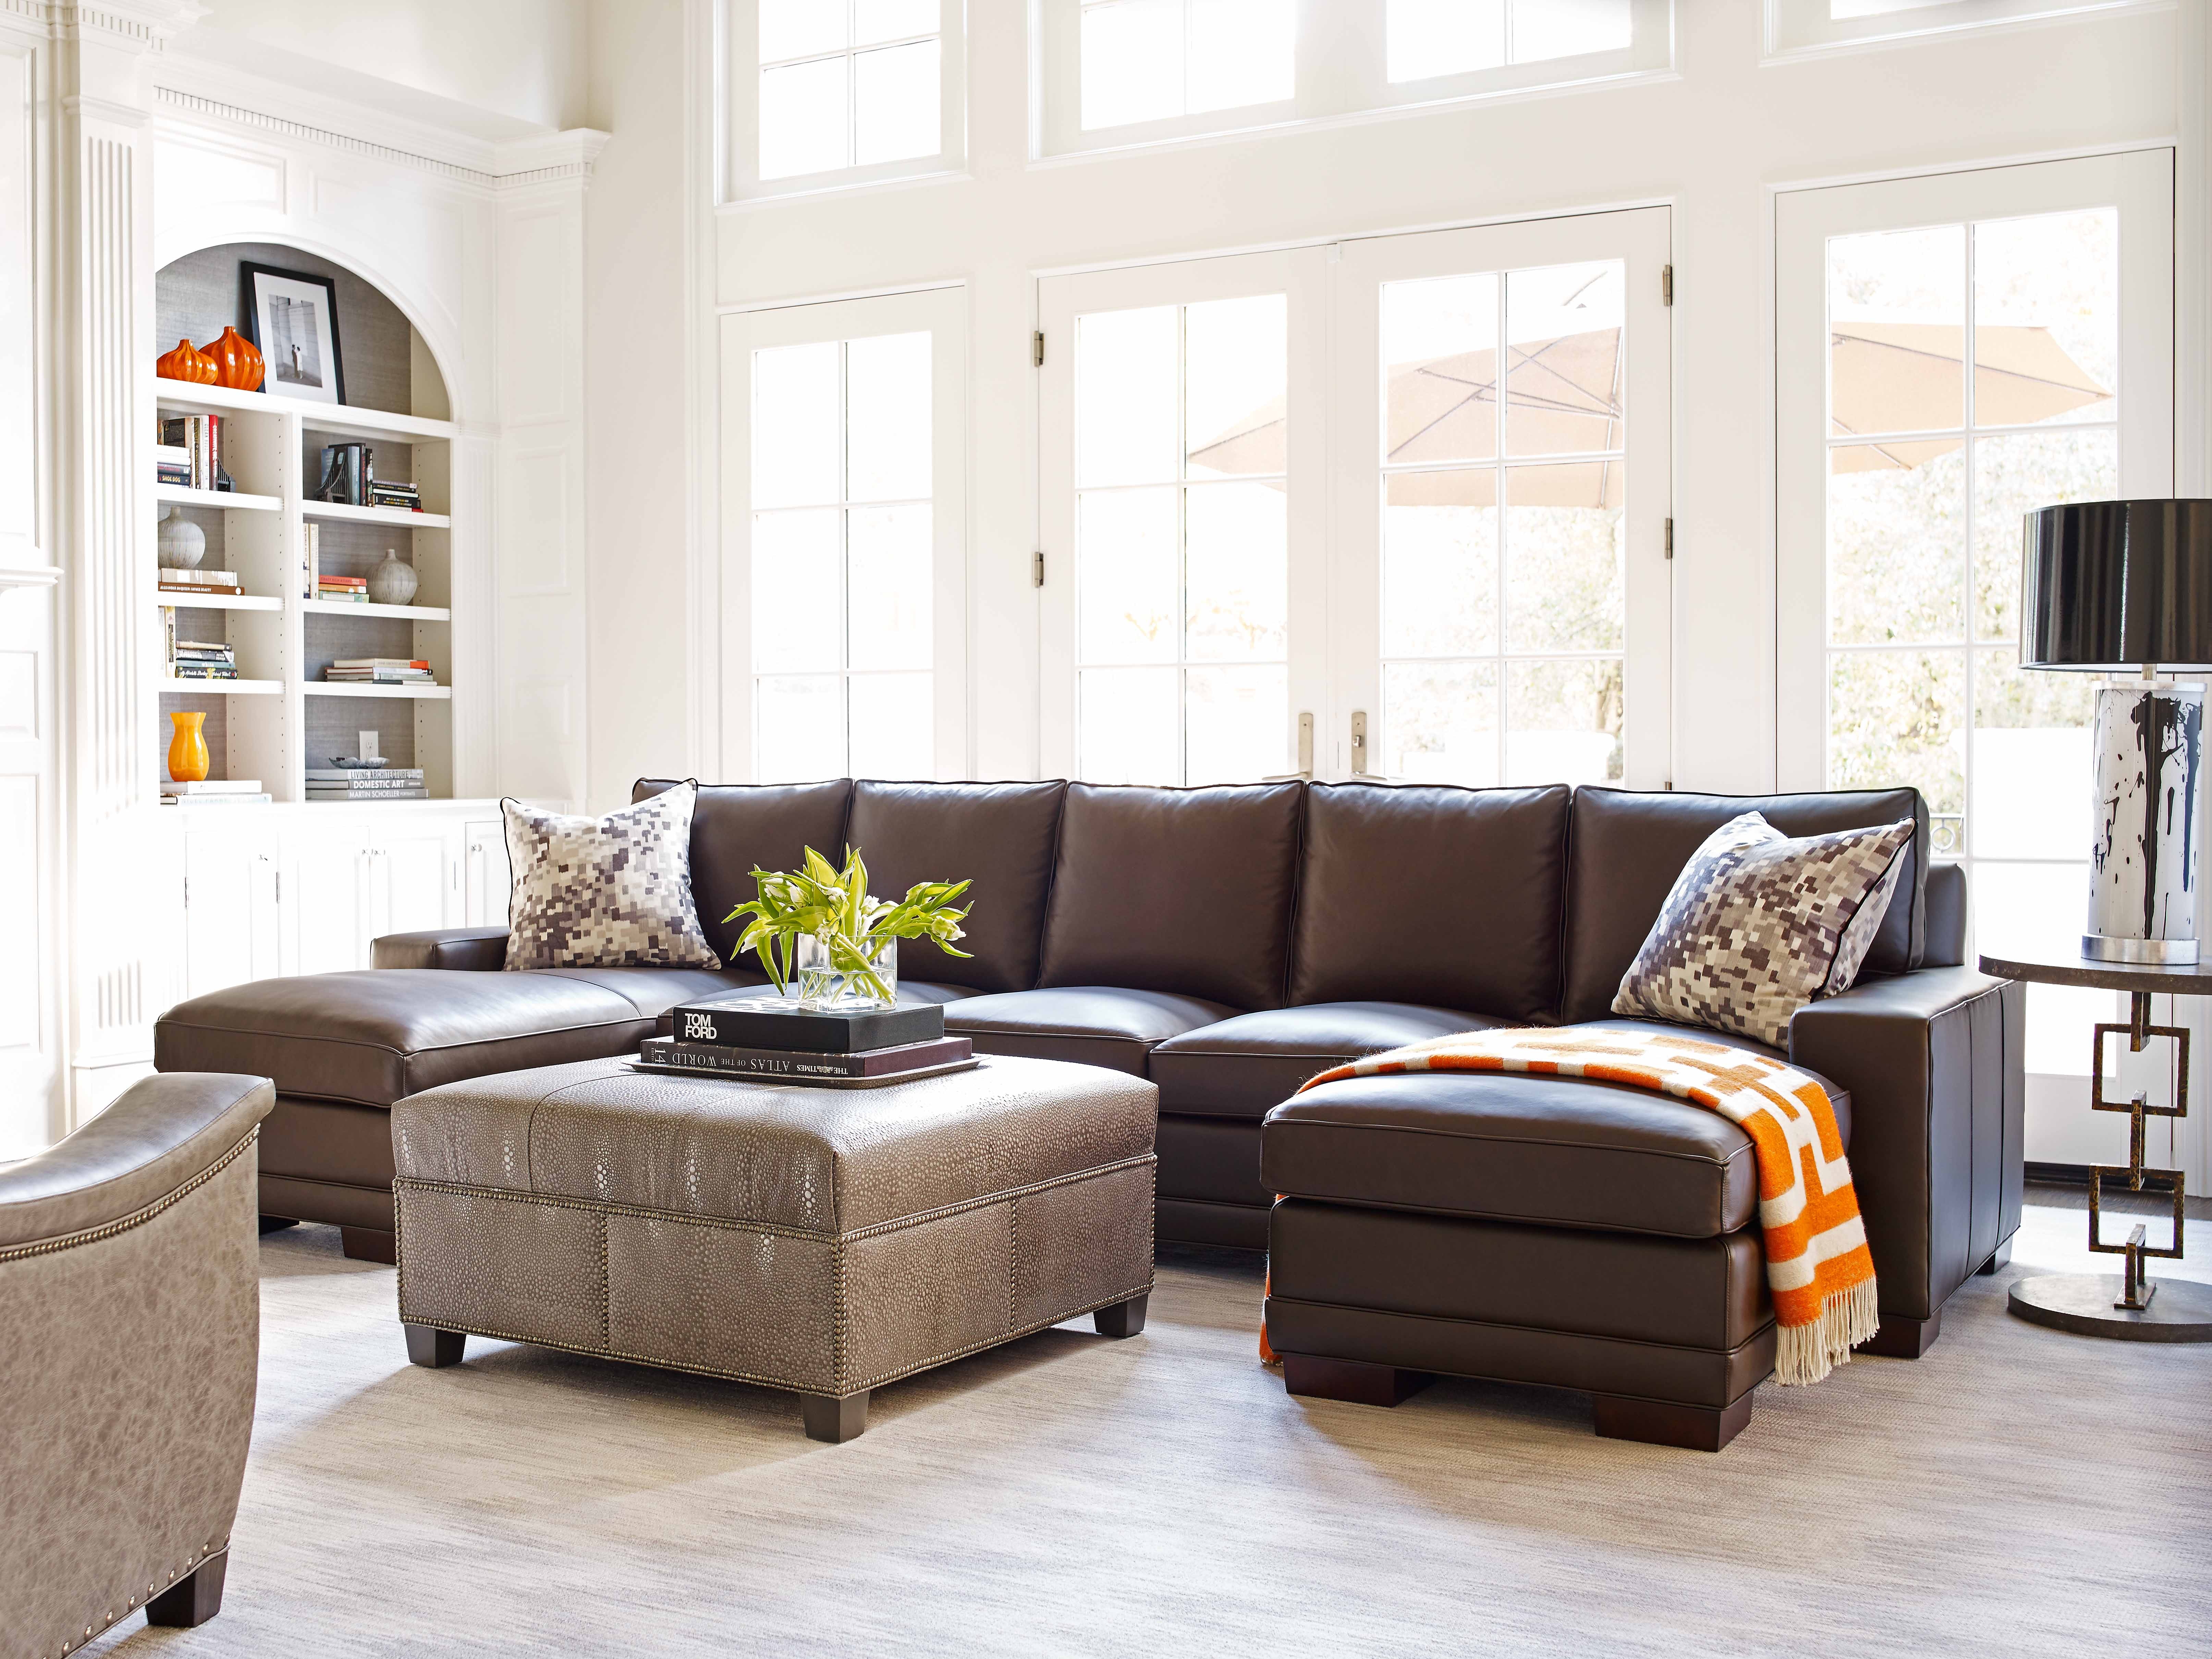 Living room and dining room furniture in Orem, UT